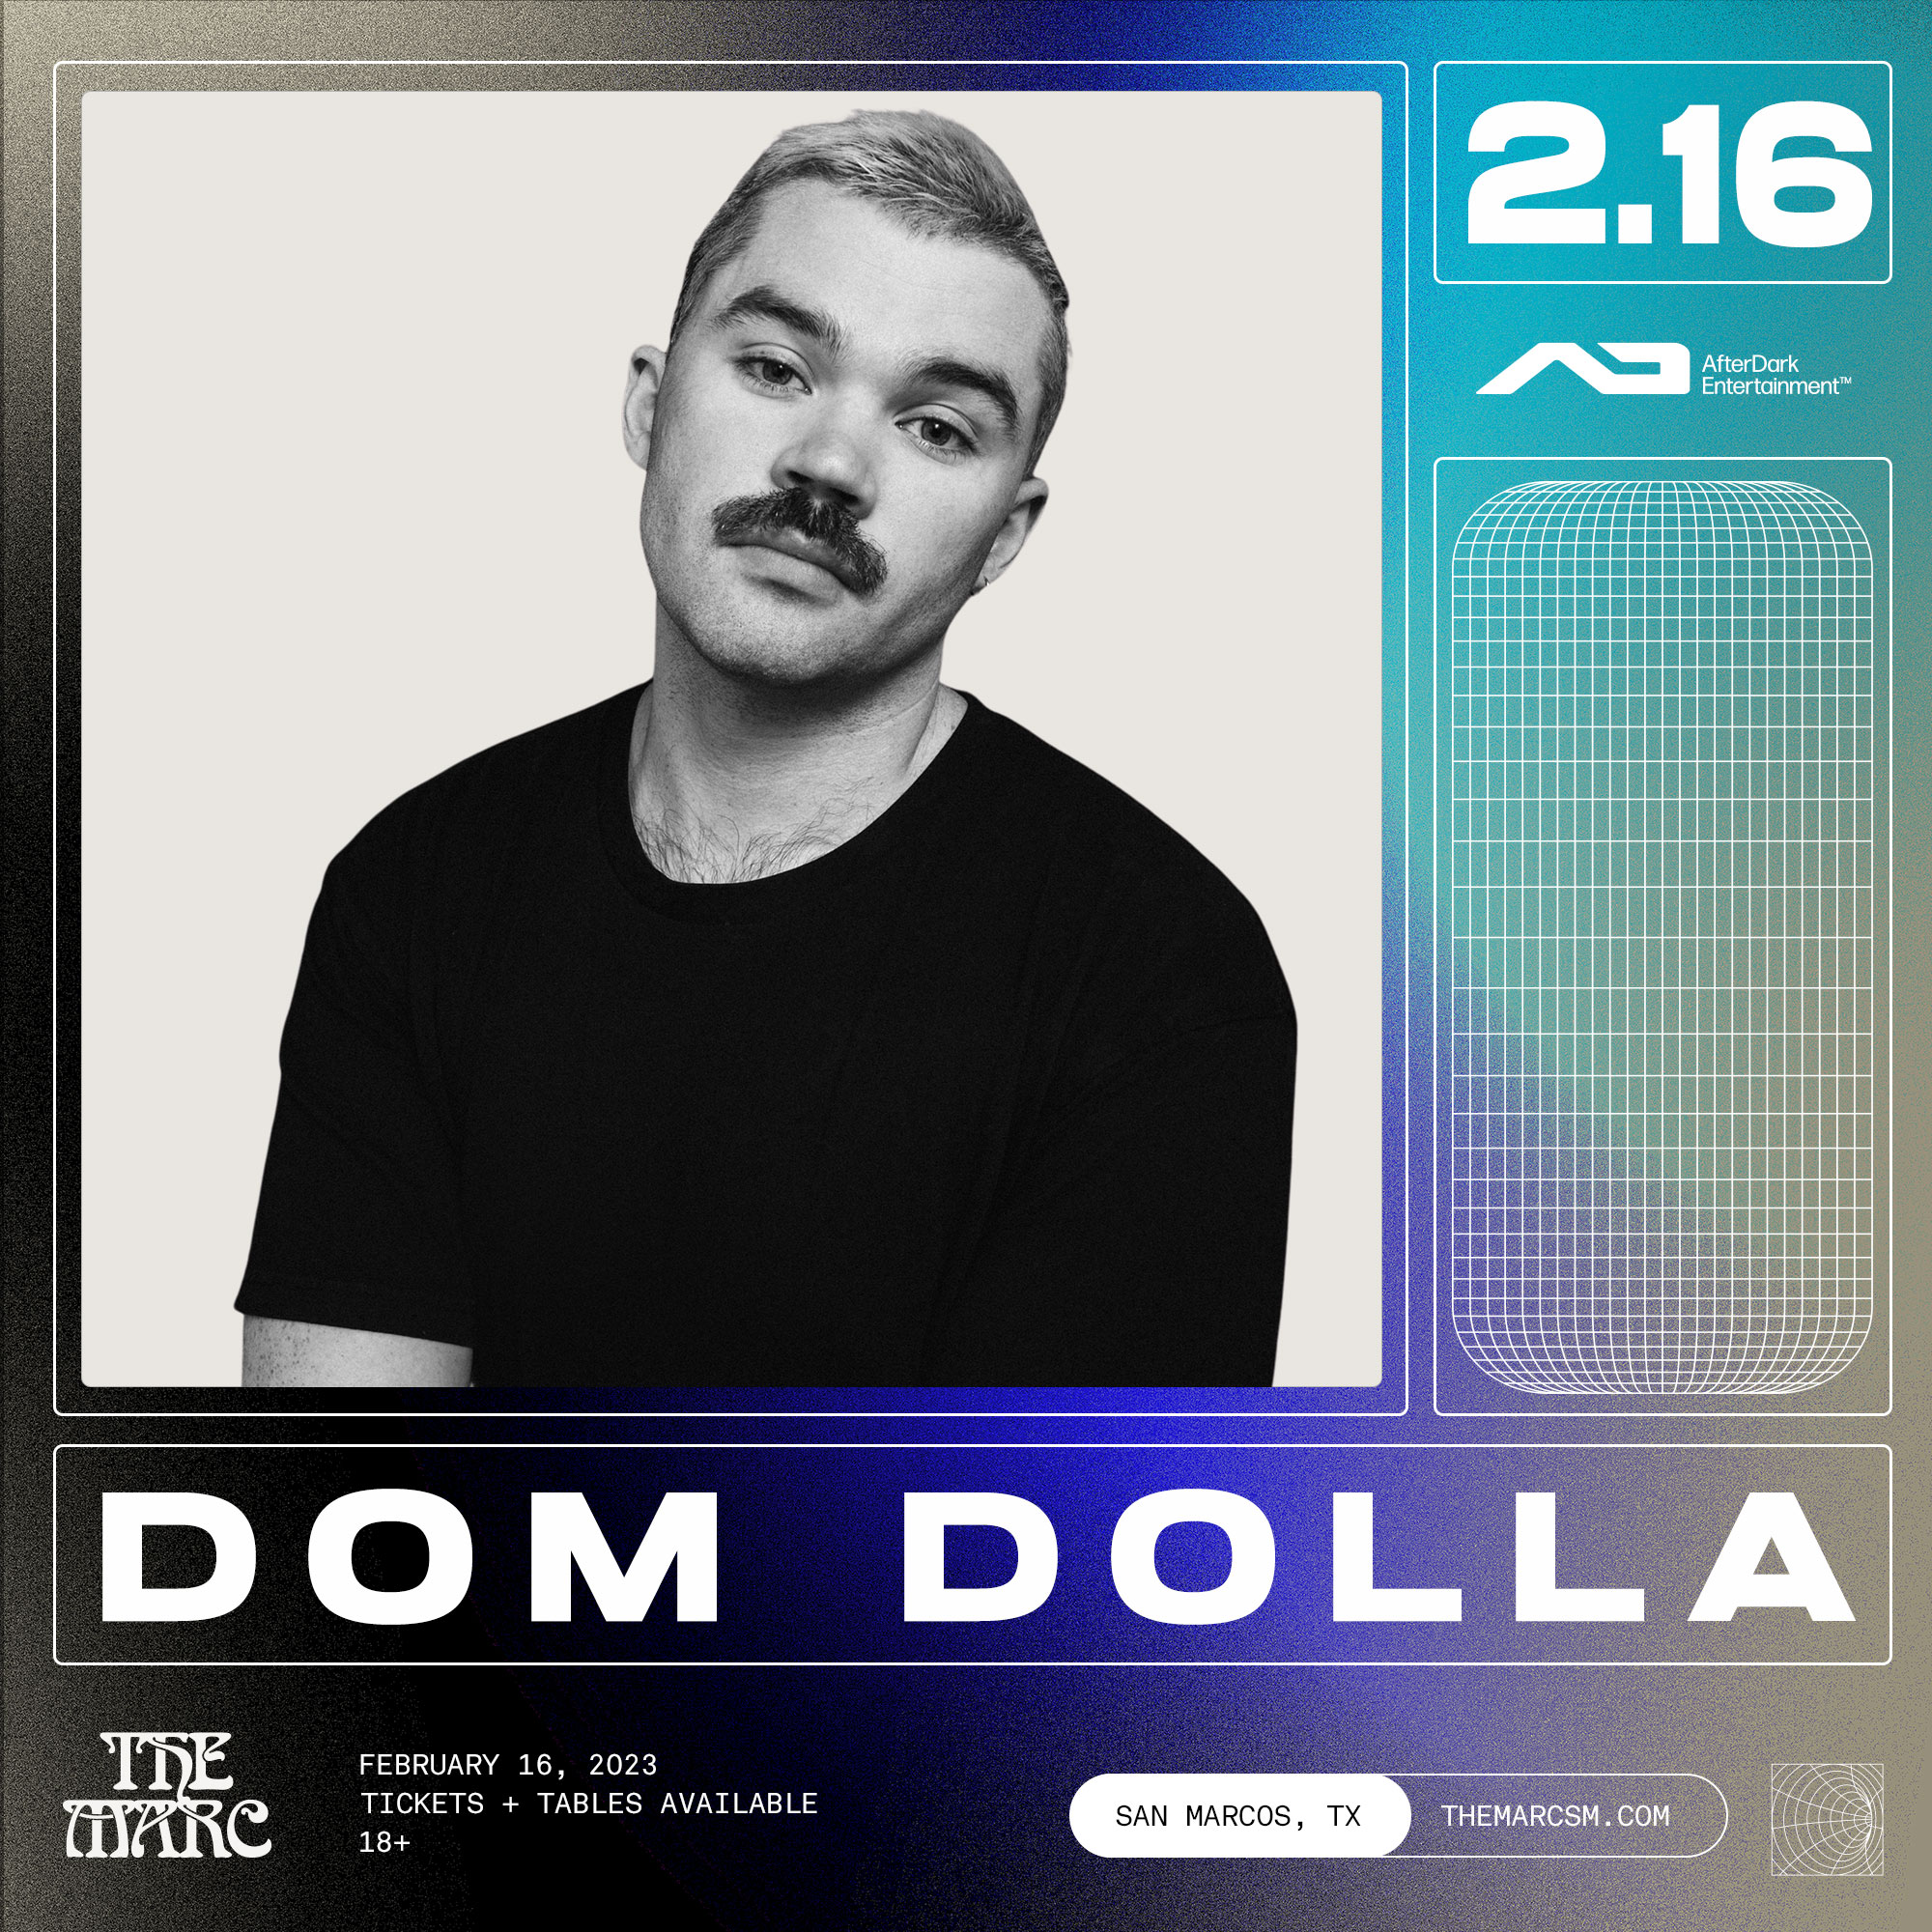 Buy Tickets to 2.16 Dom Dolla at The Marc San Marcos TX in San